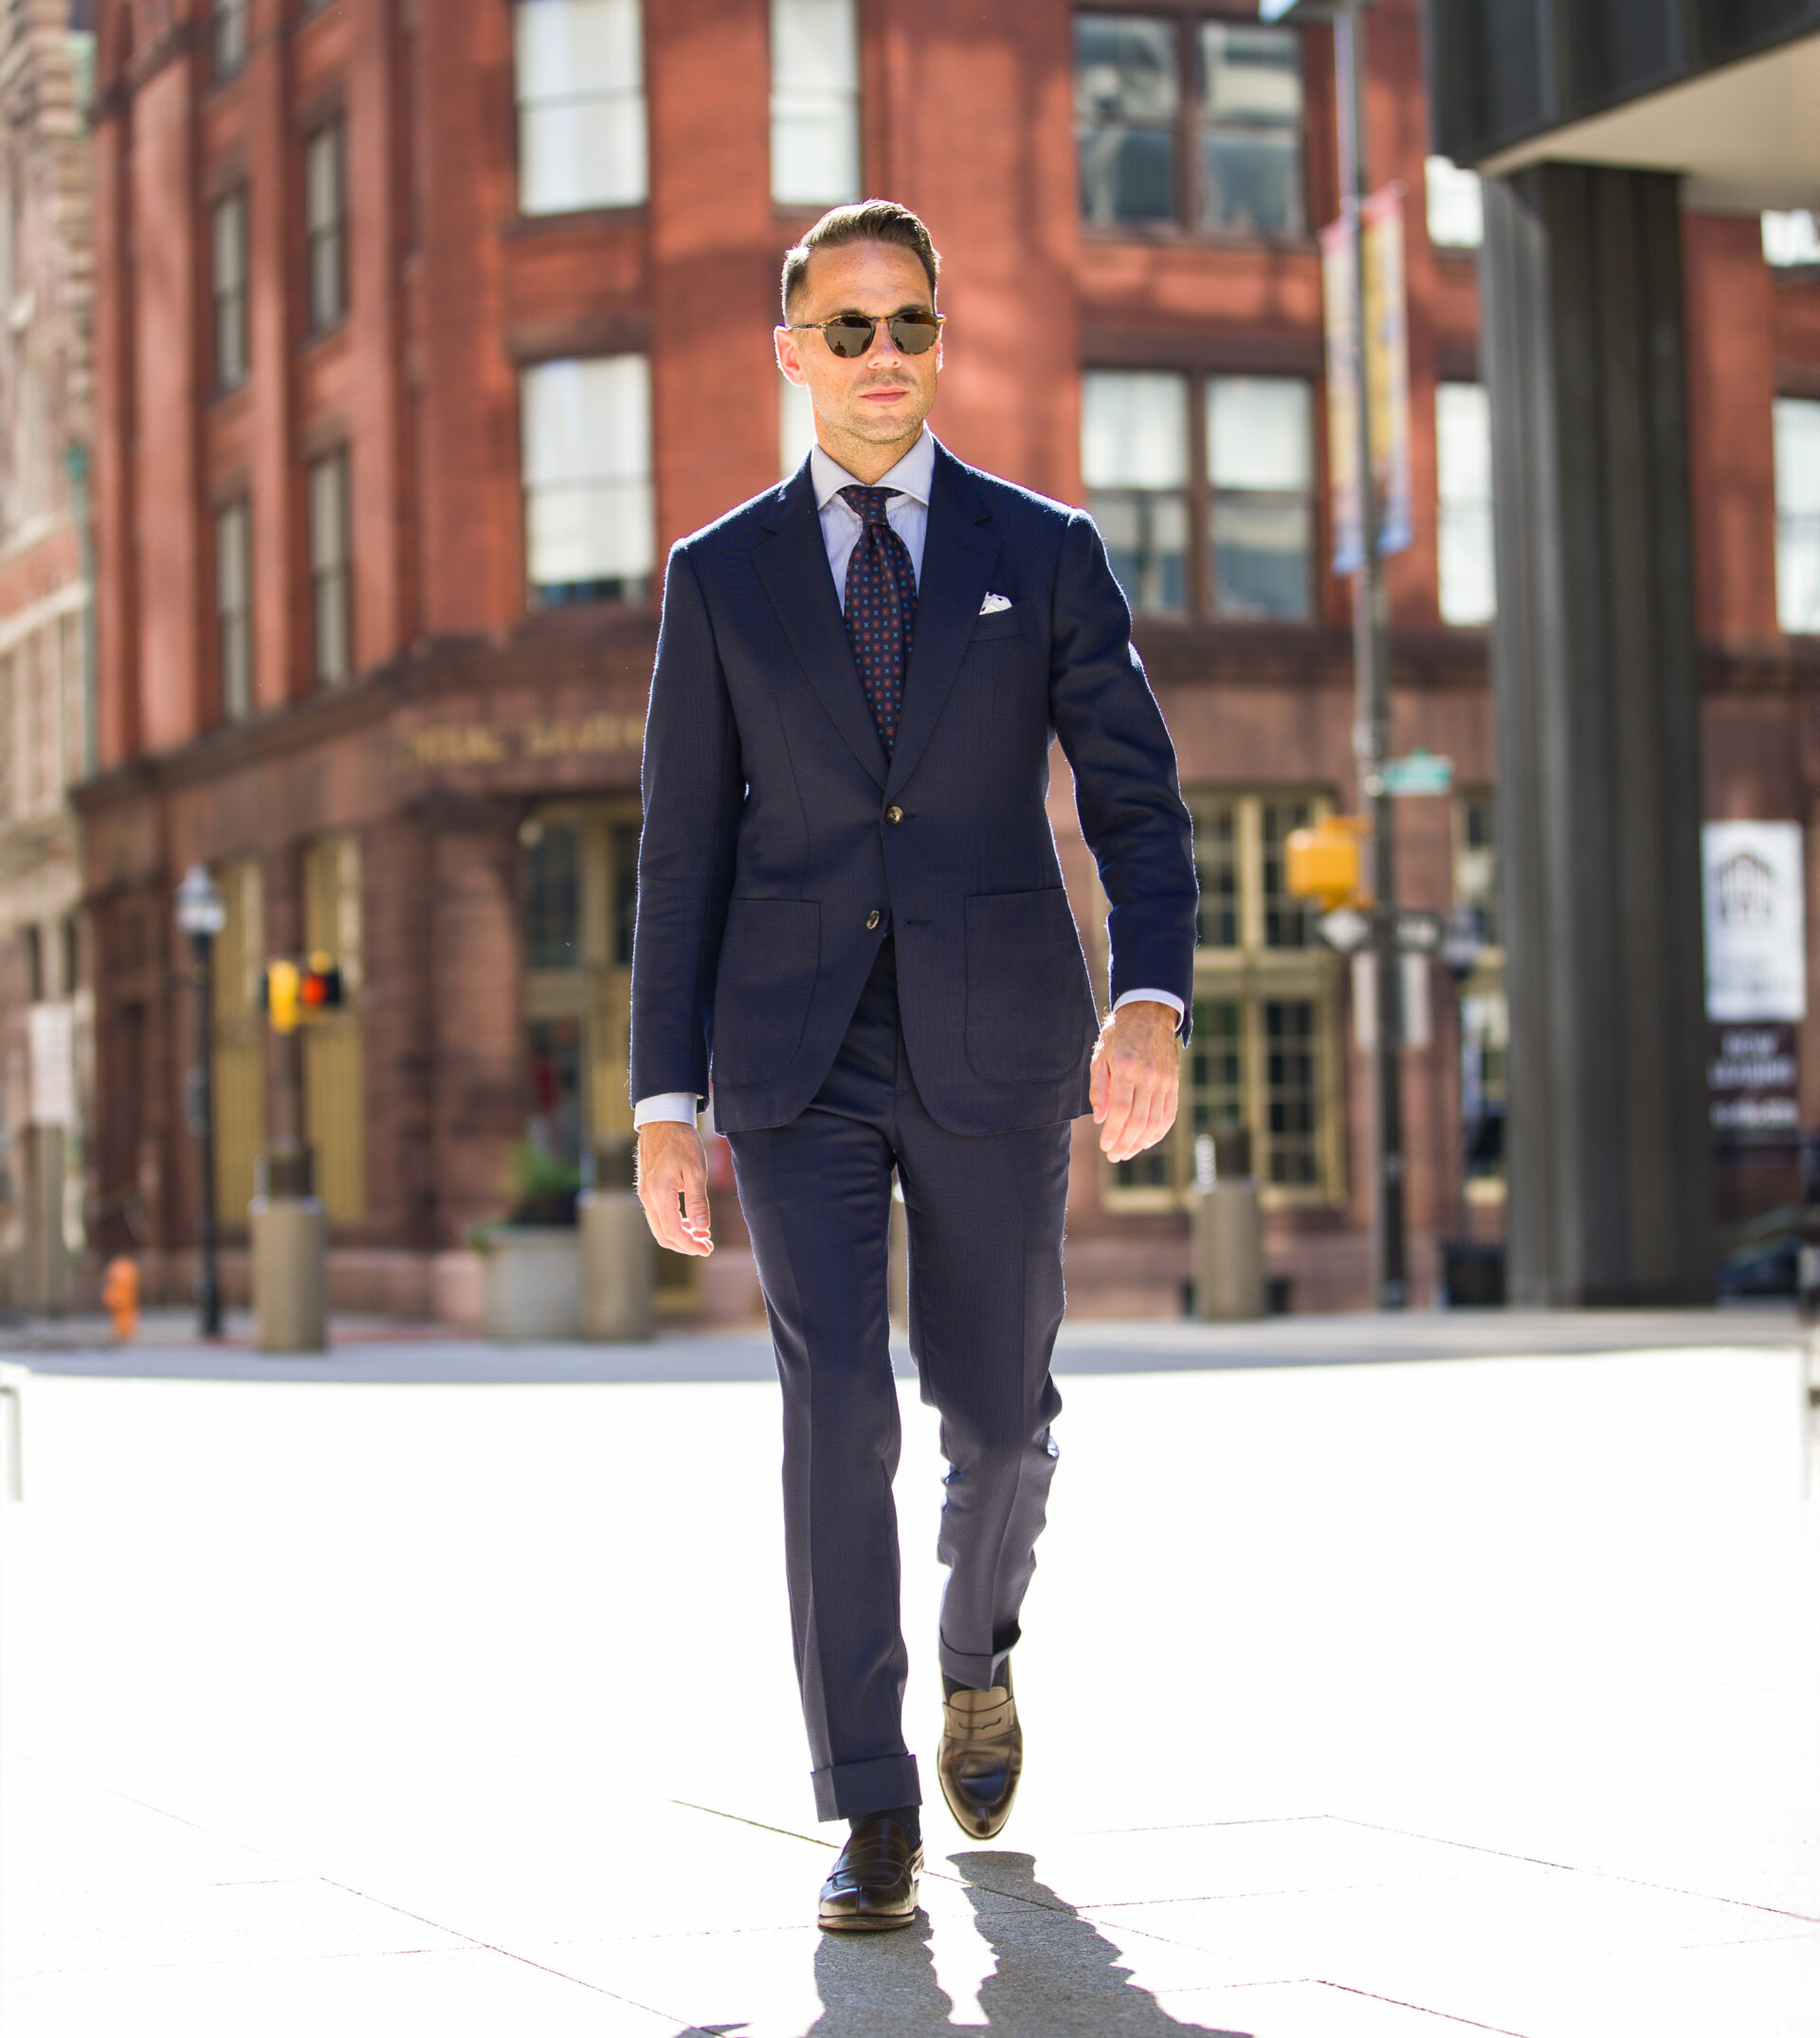 navy hopsack suit with blue shirt and loafers outfit